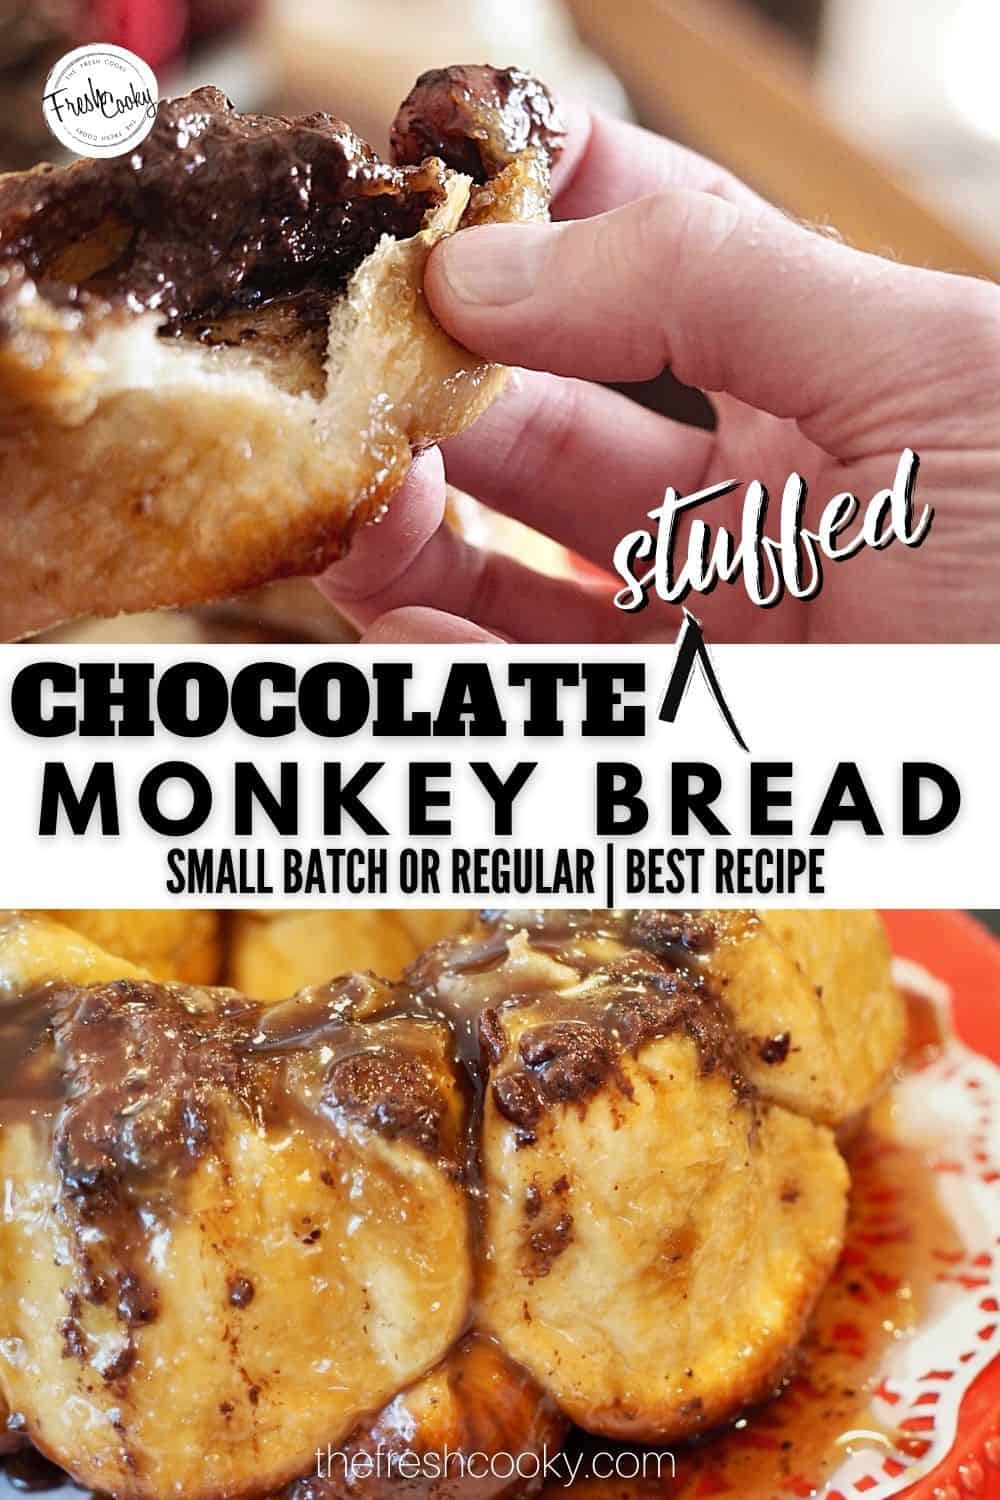 Long pin with two images for Chocolate stuffed monkey bread. Top image hand pulling apart a chocolate stuffed roll. Bottom image a close up of small batch chocolate monkey bread sitting on a red platter oozing with chocolate and caramel.